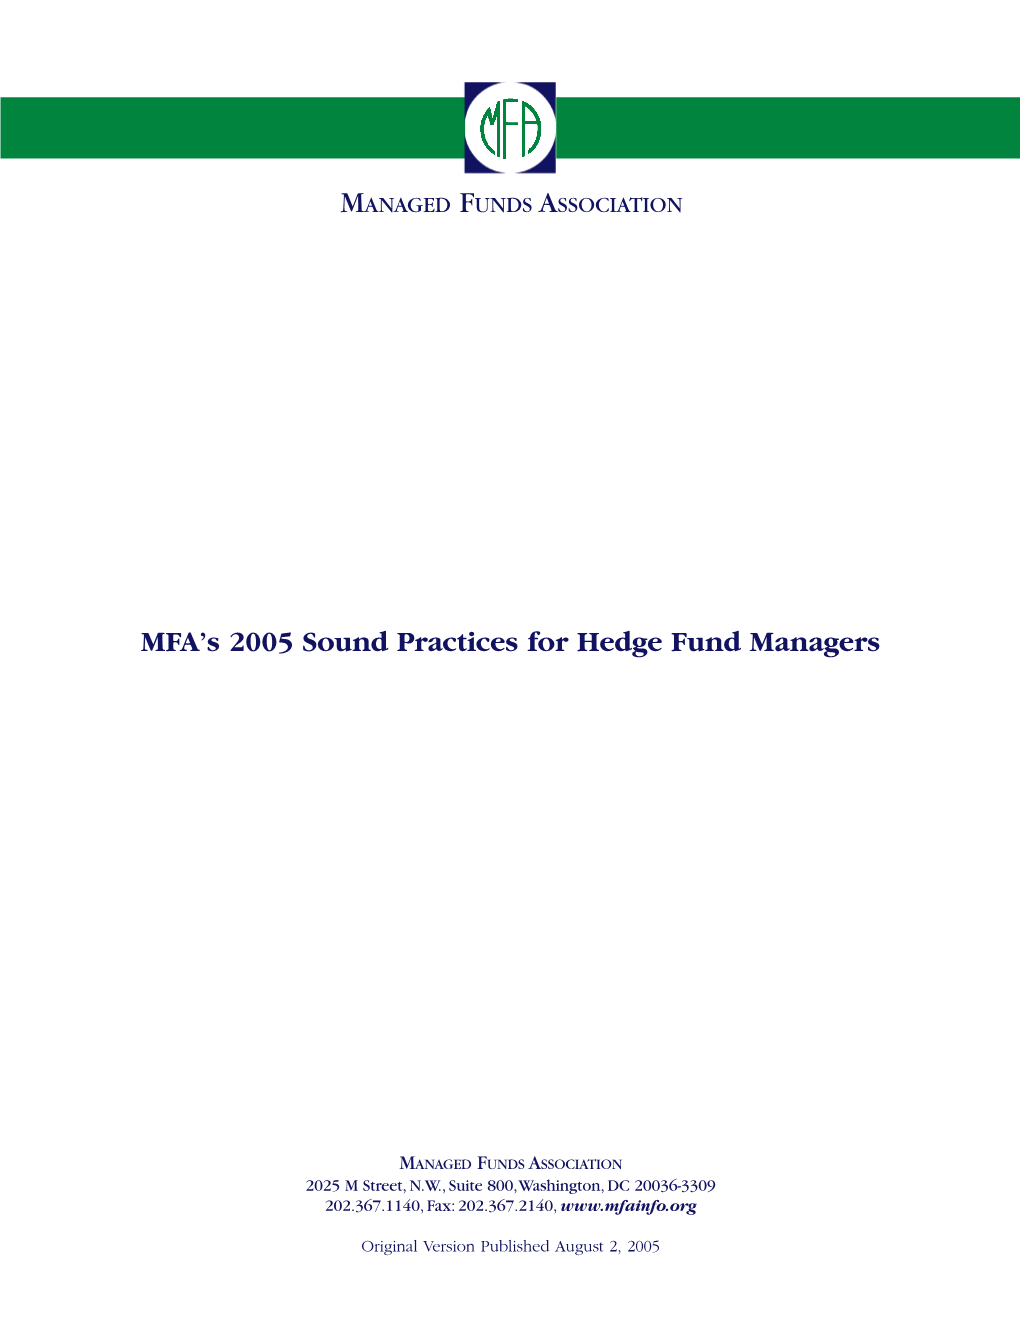 MFA's 2005 Sound Practices for Hedge Fund Managers